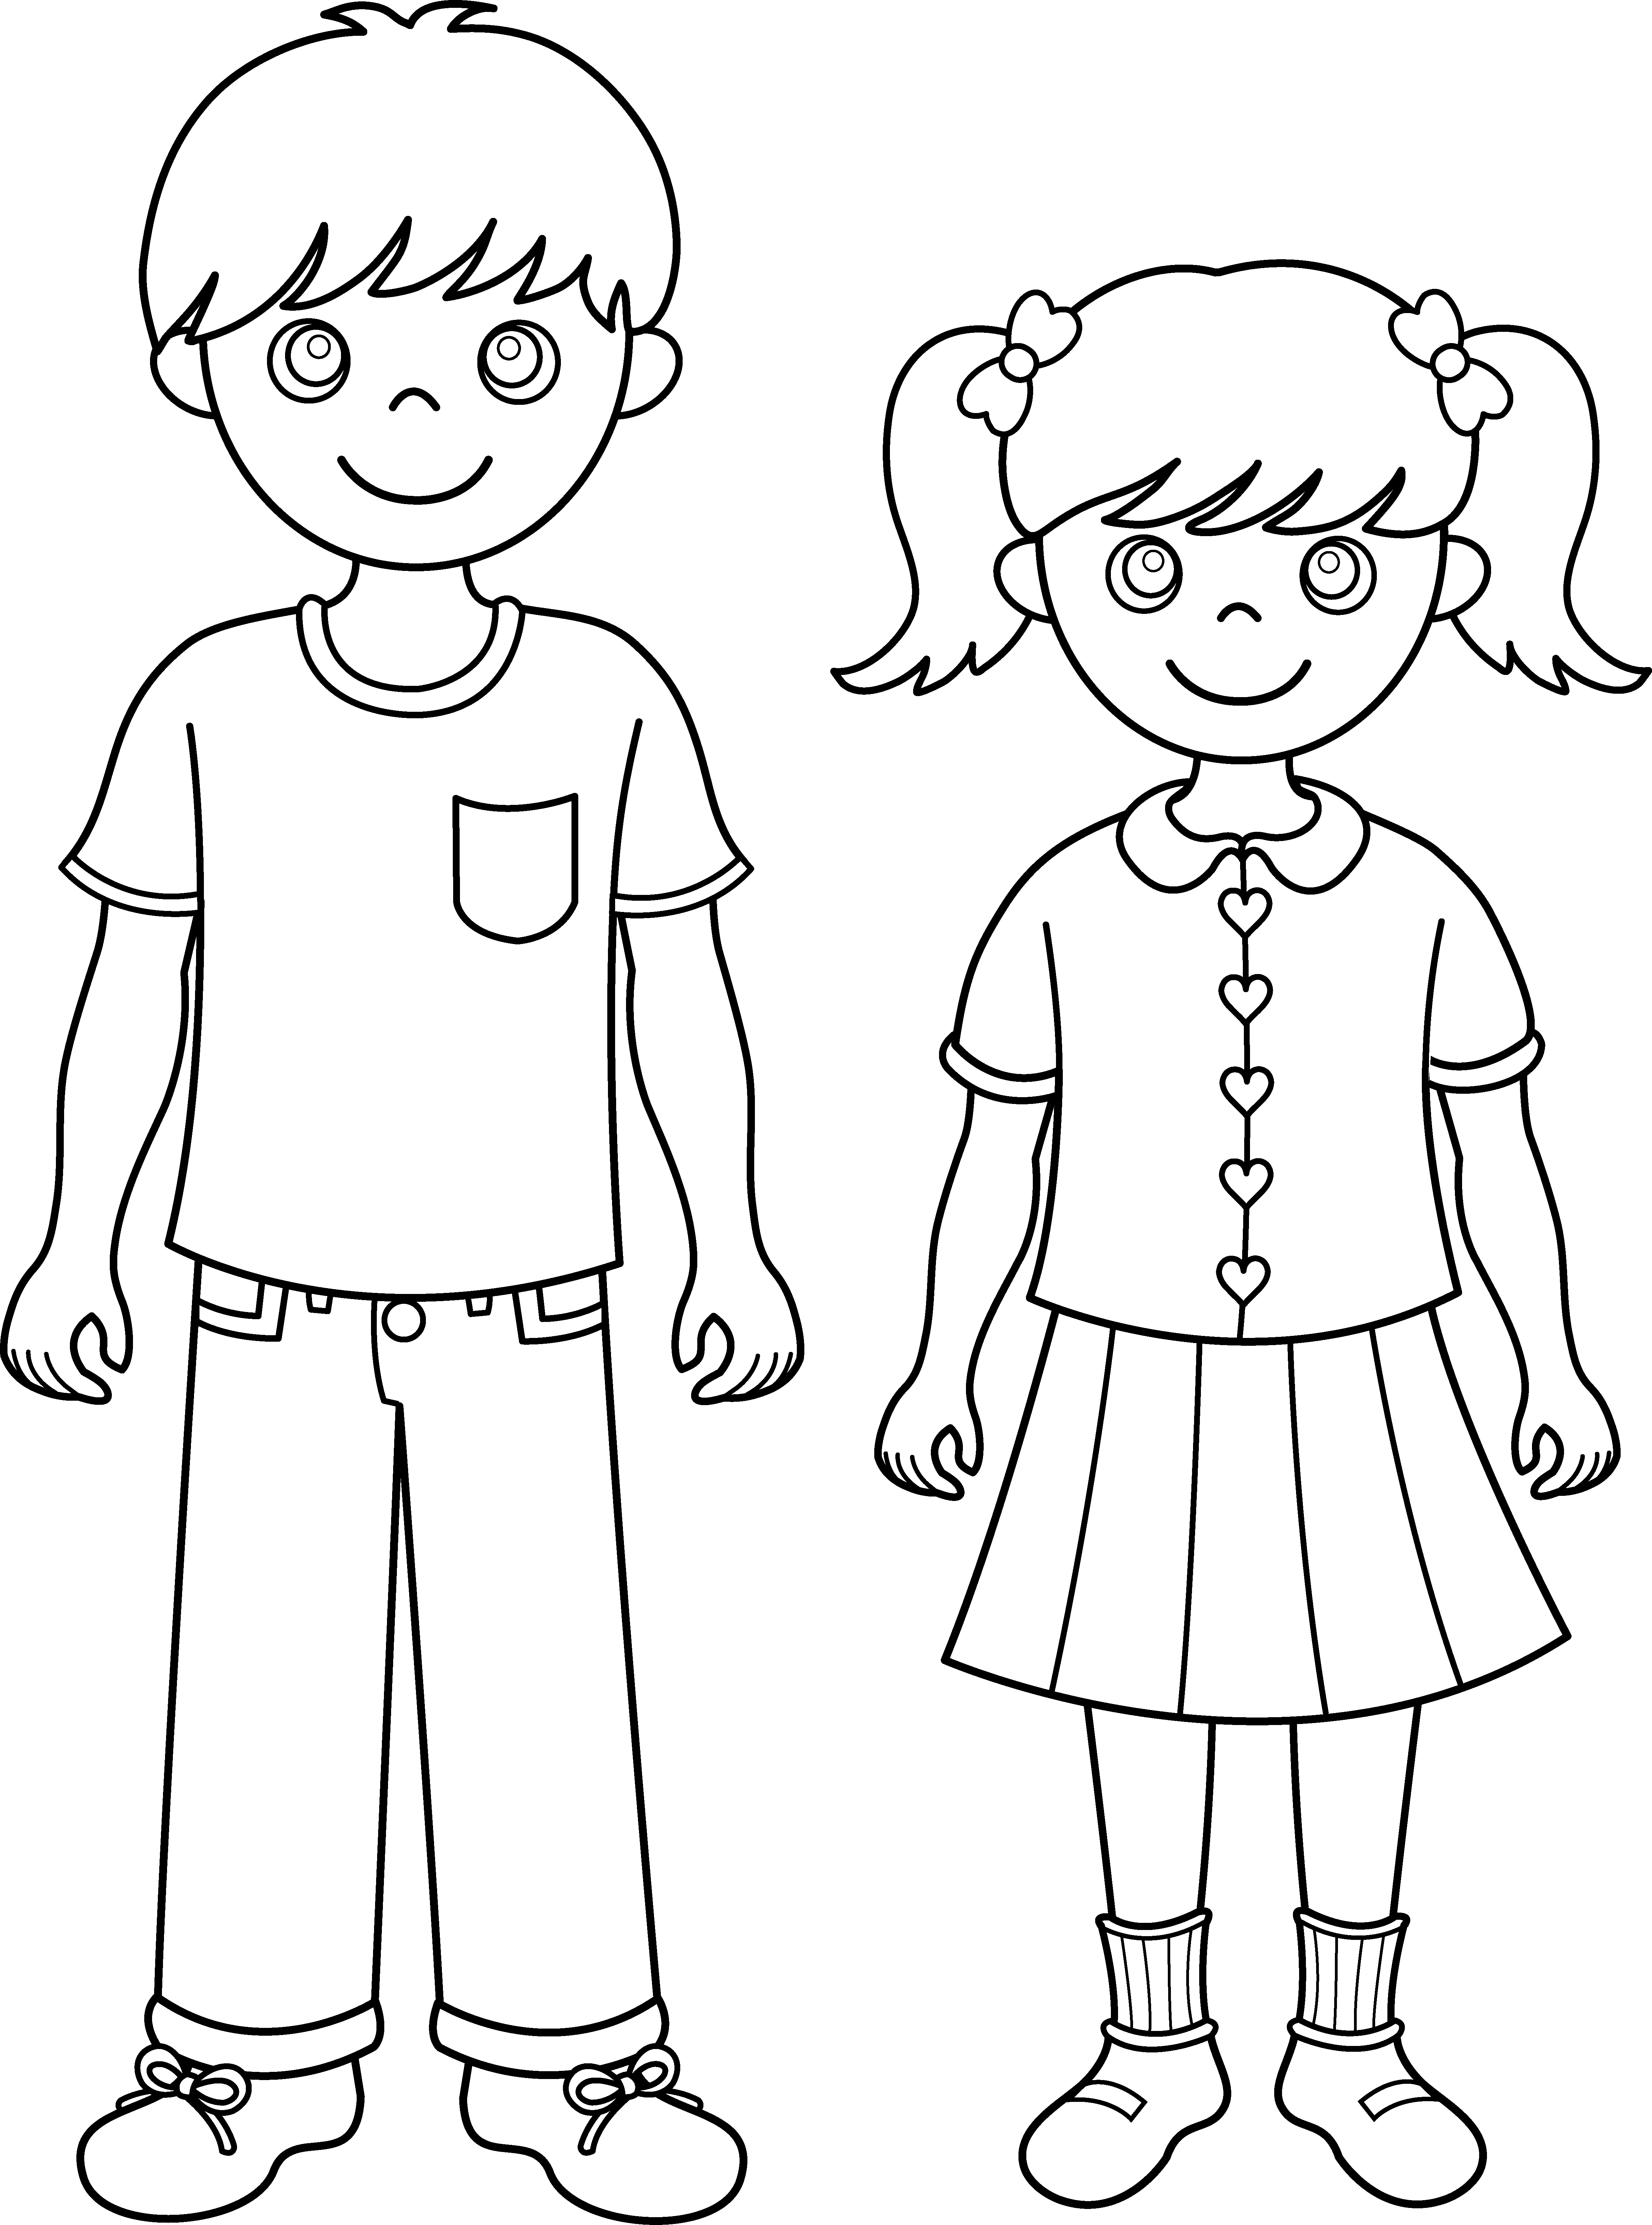 Boy and girl kids sketch brother sister Royalty Free Vector-saigonsouth.com.vn